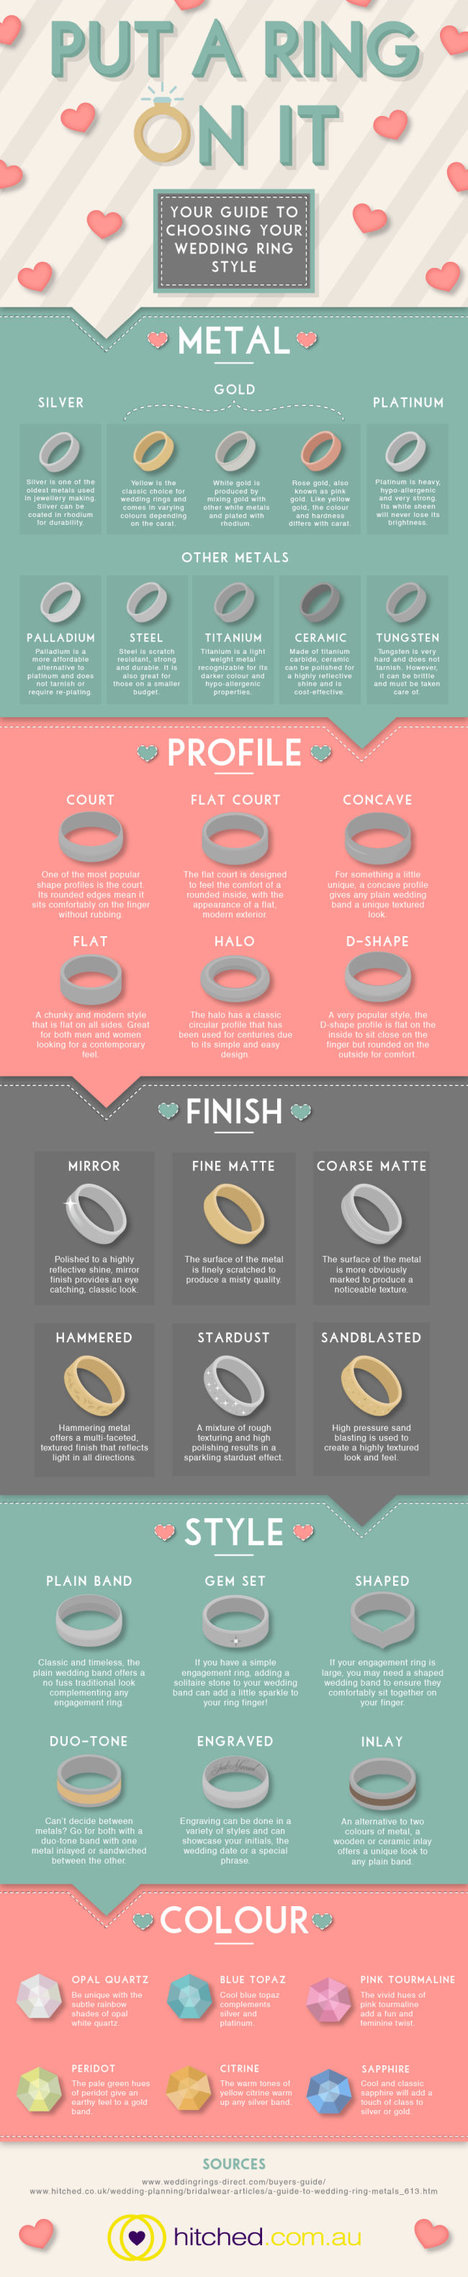 Put A Ring On It - Picking Your Wedding Rings